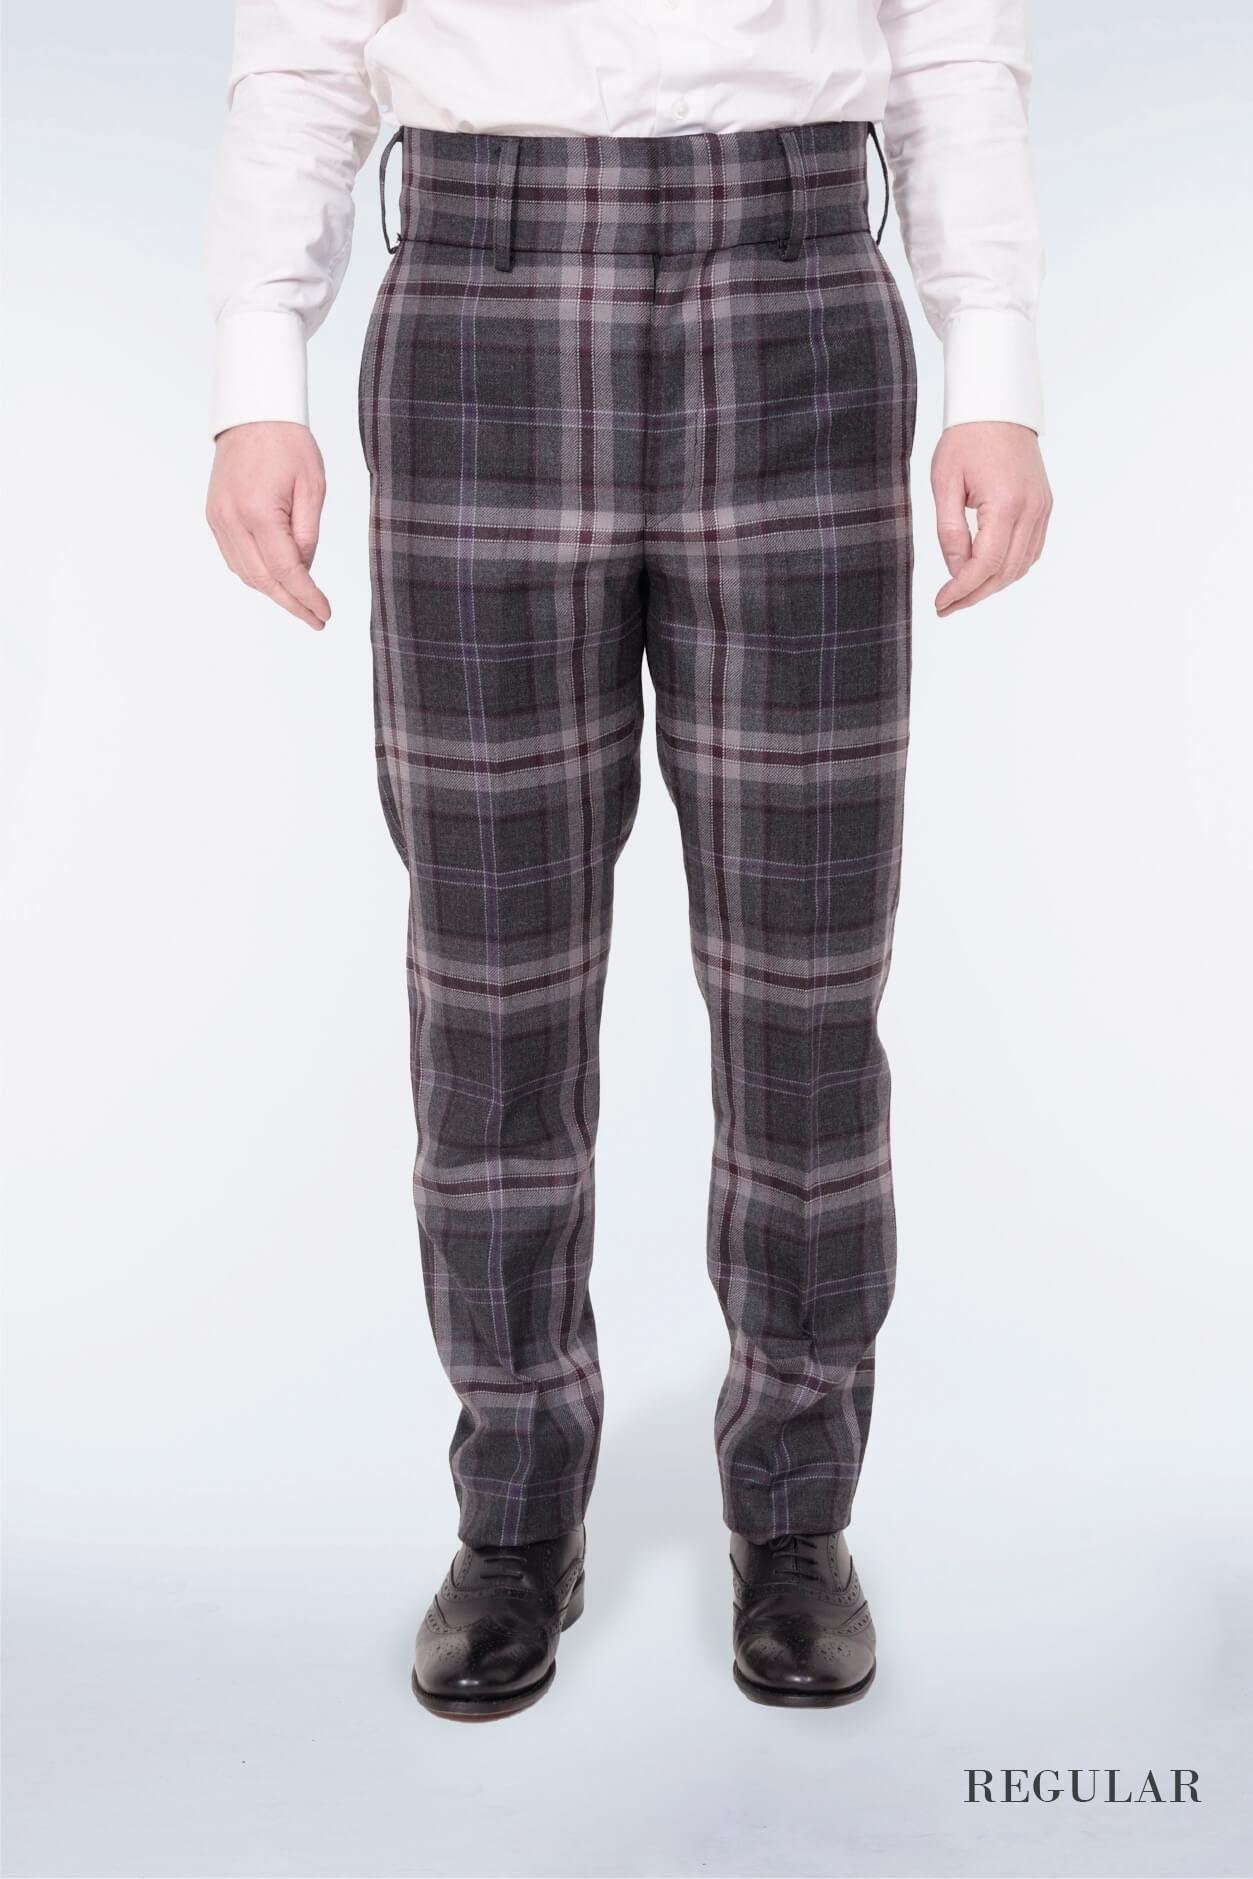 Tartan Trousers  Banned Cloth Trousers  EMP